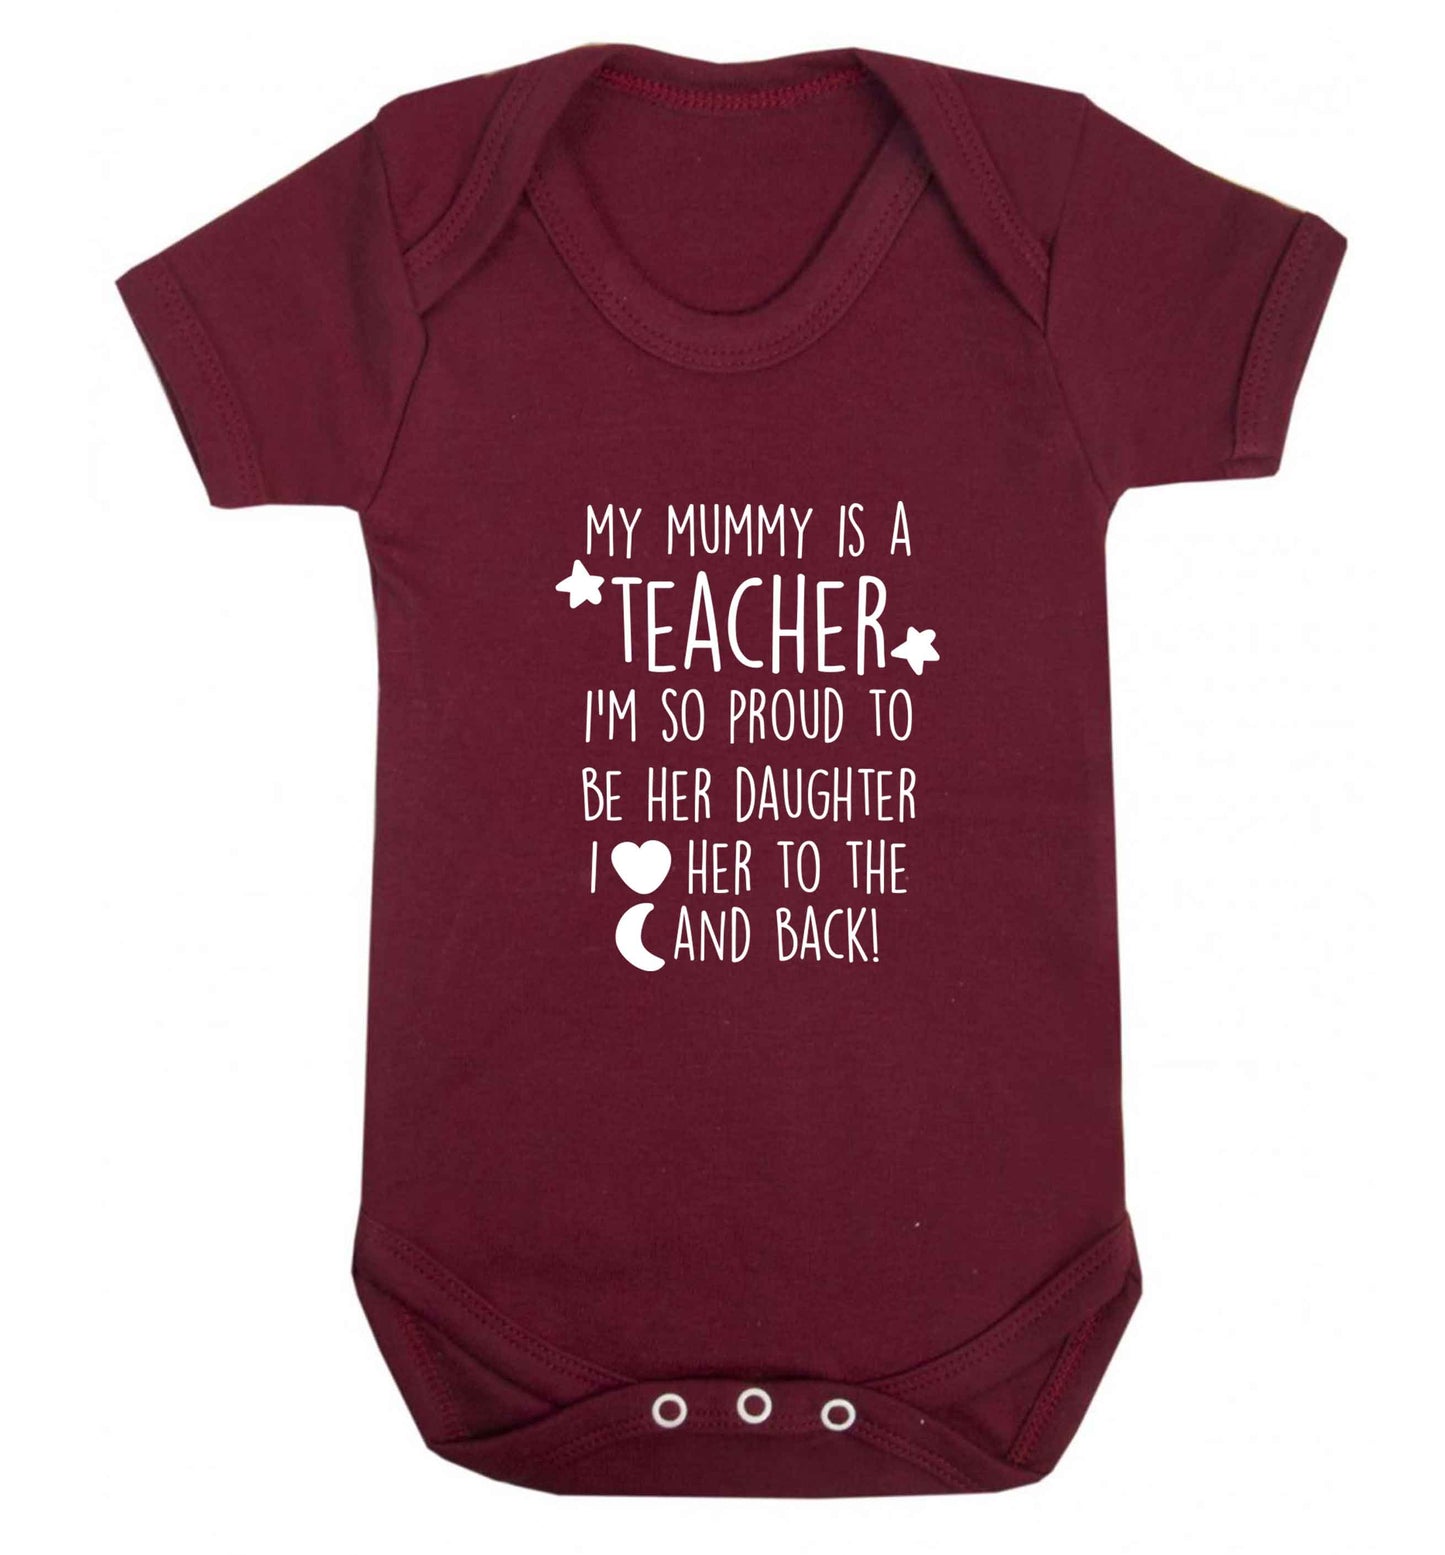 My mummy is a teacher I'm so proud to be her daughter I love her to the moon and back baby vest maroon 18-24 months